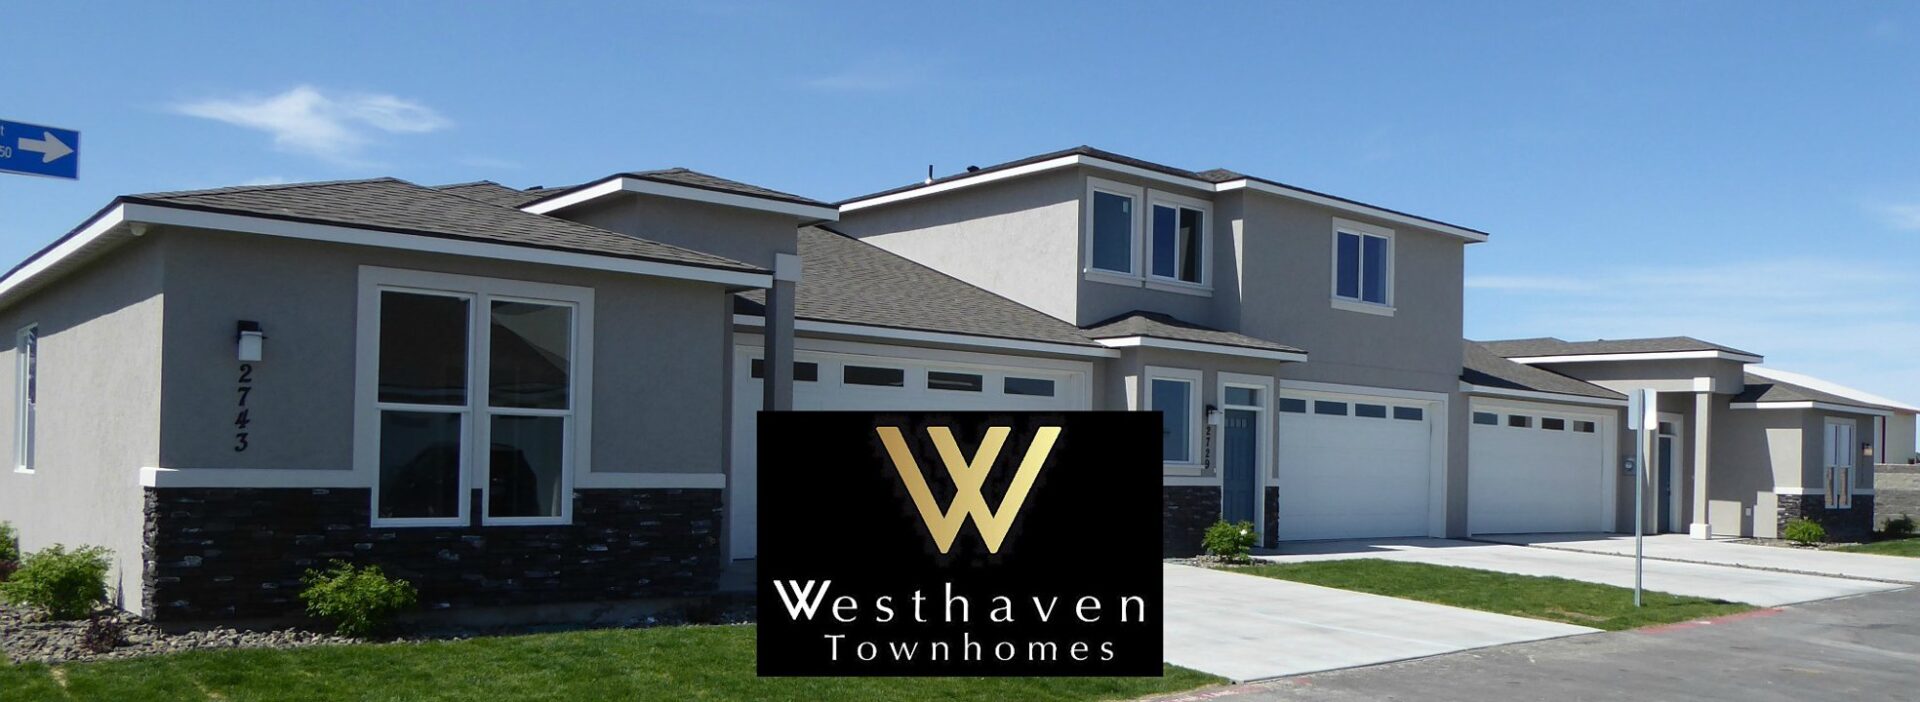 front of westhaven townhomes